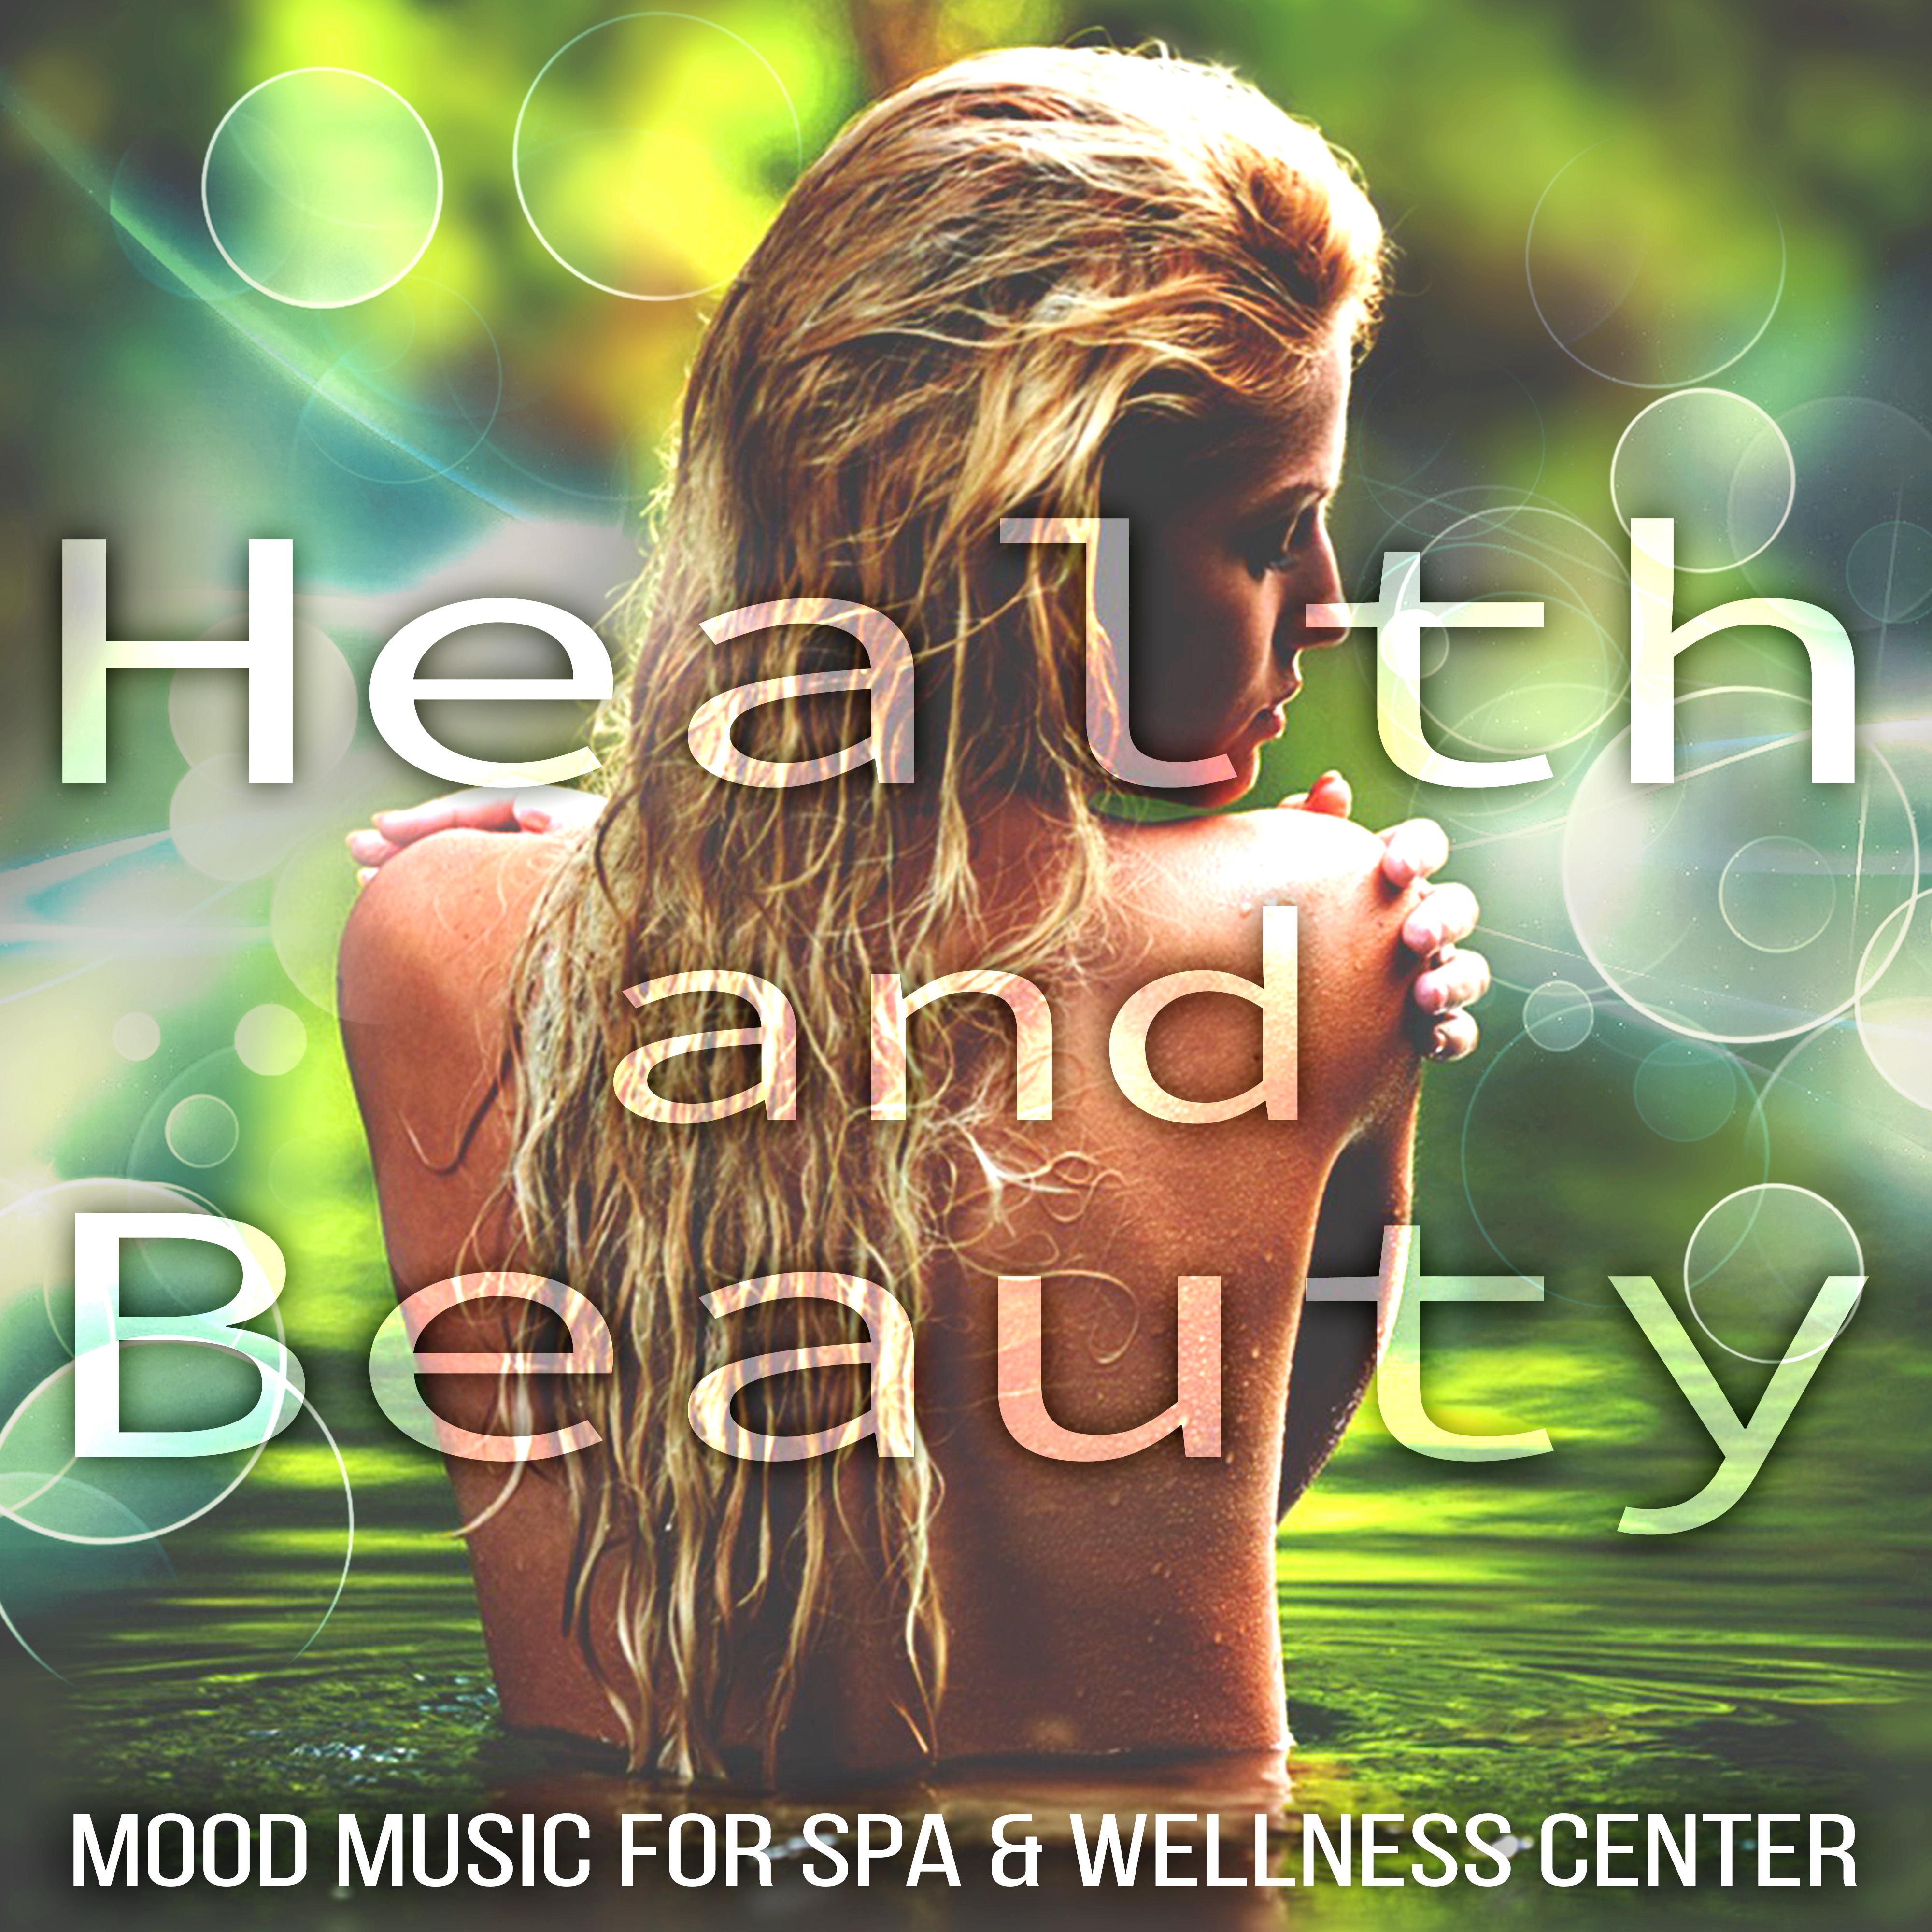 Health and Beauty - Mood Music for Spa & Wellness Center, Soothing Sounds for Massage, Relax and Well Being